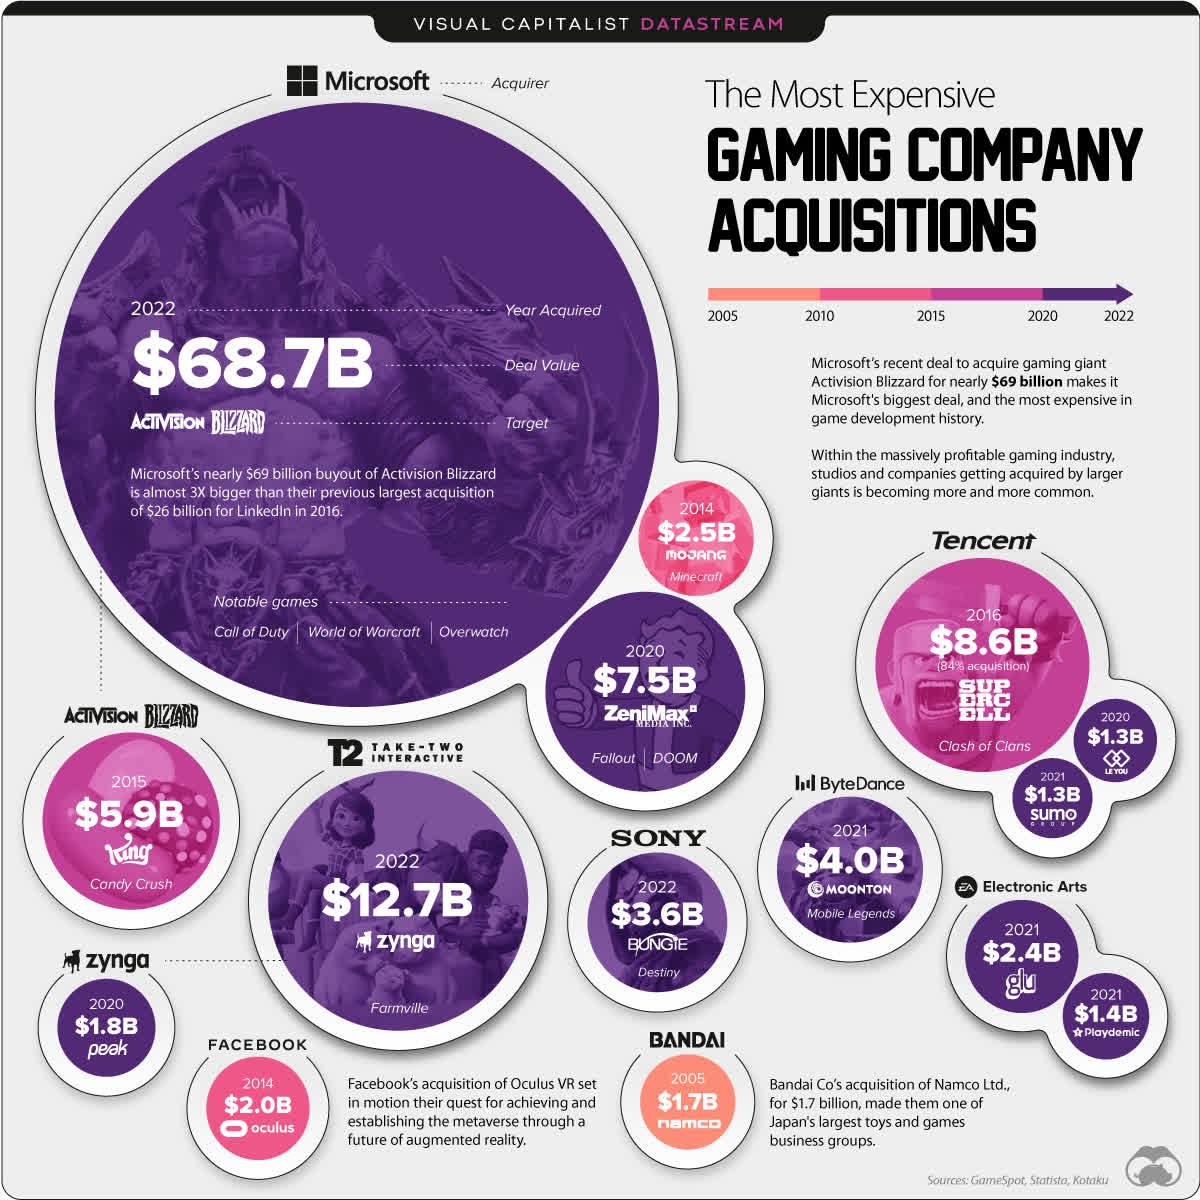 The Most Expensive Gaming Company Acquisitions of All Time